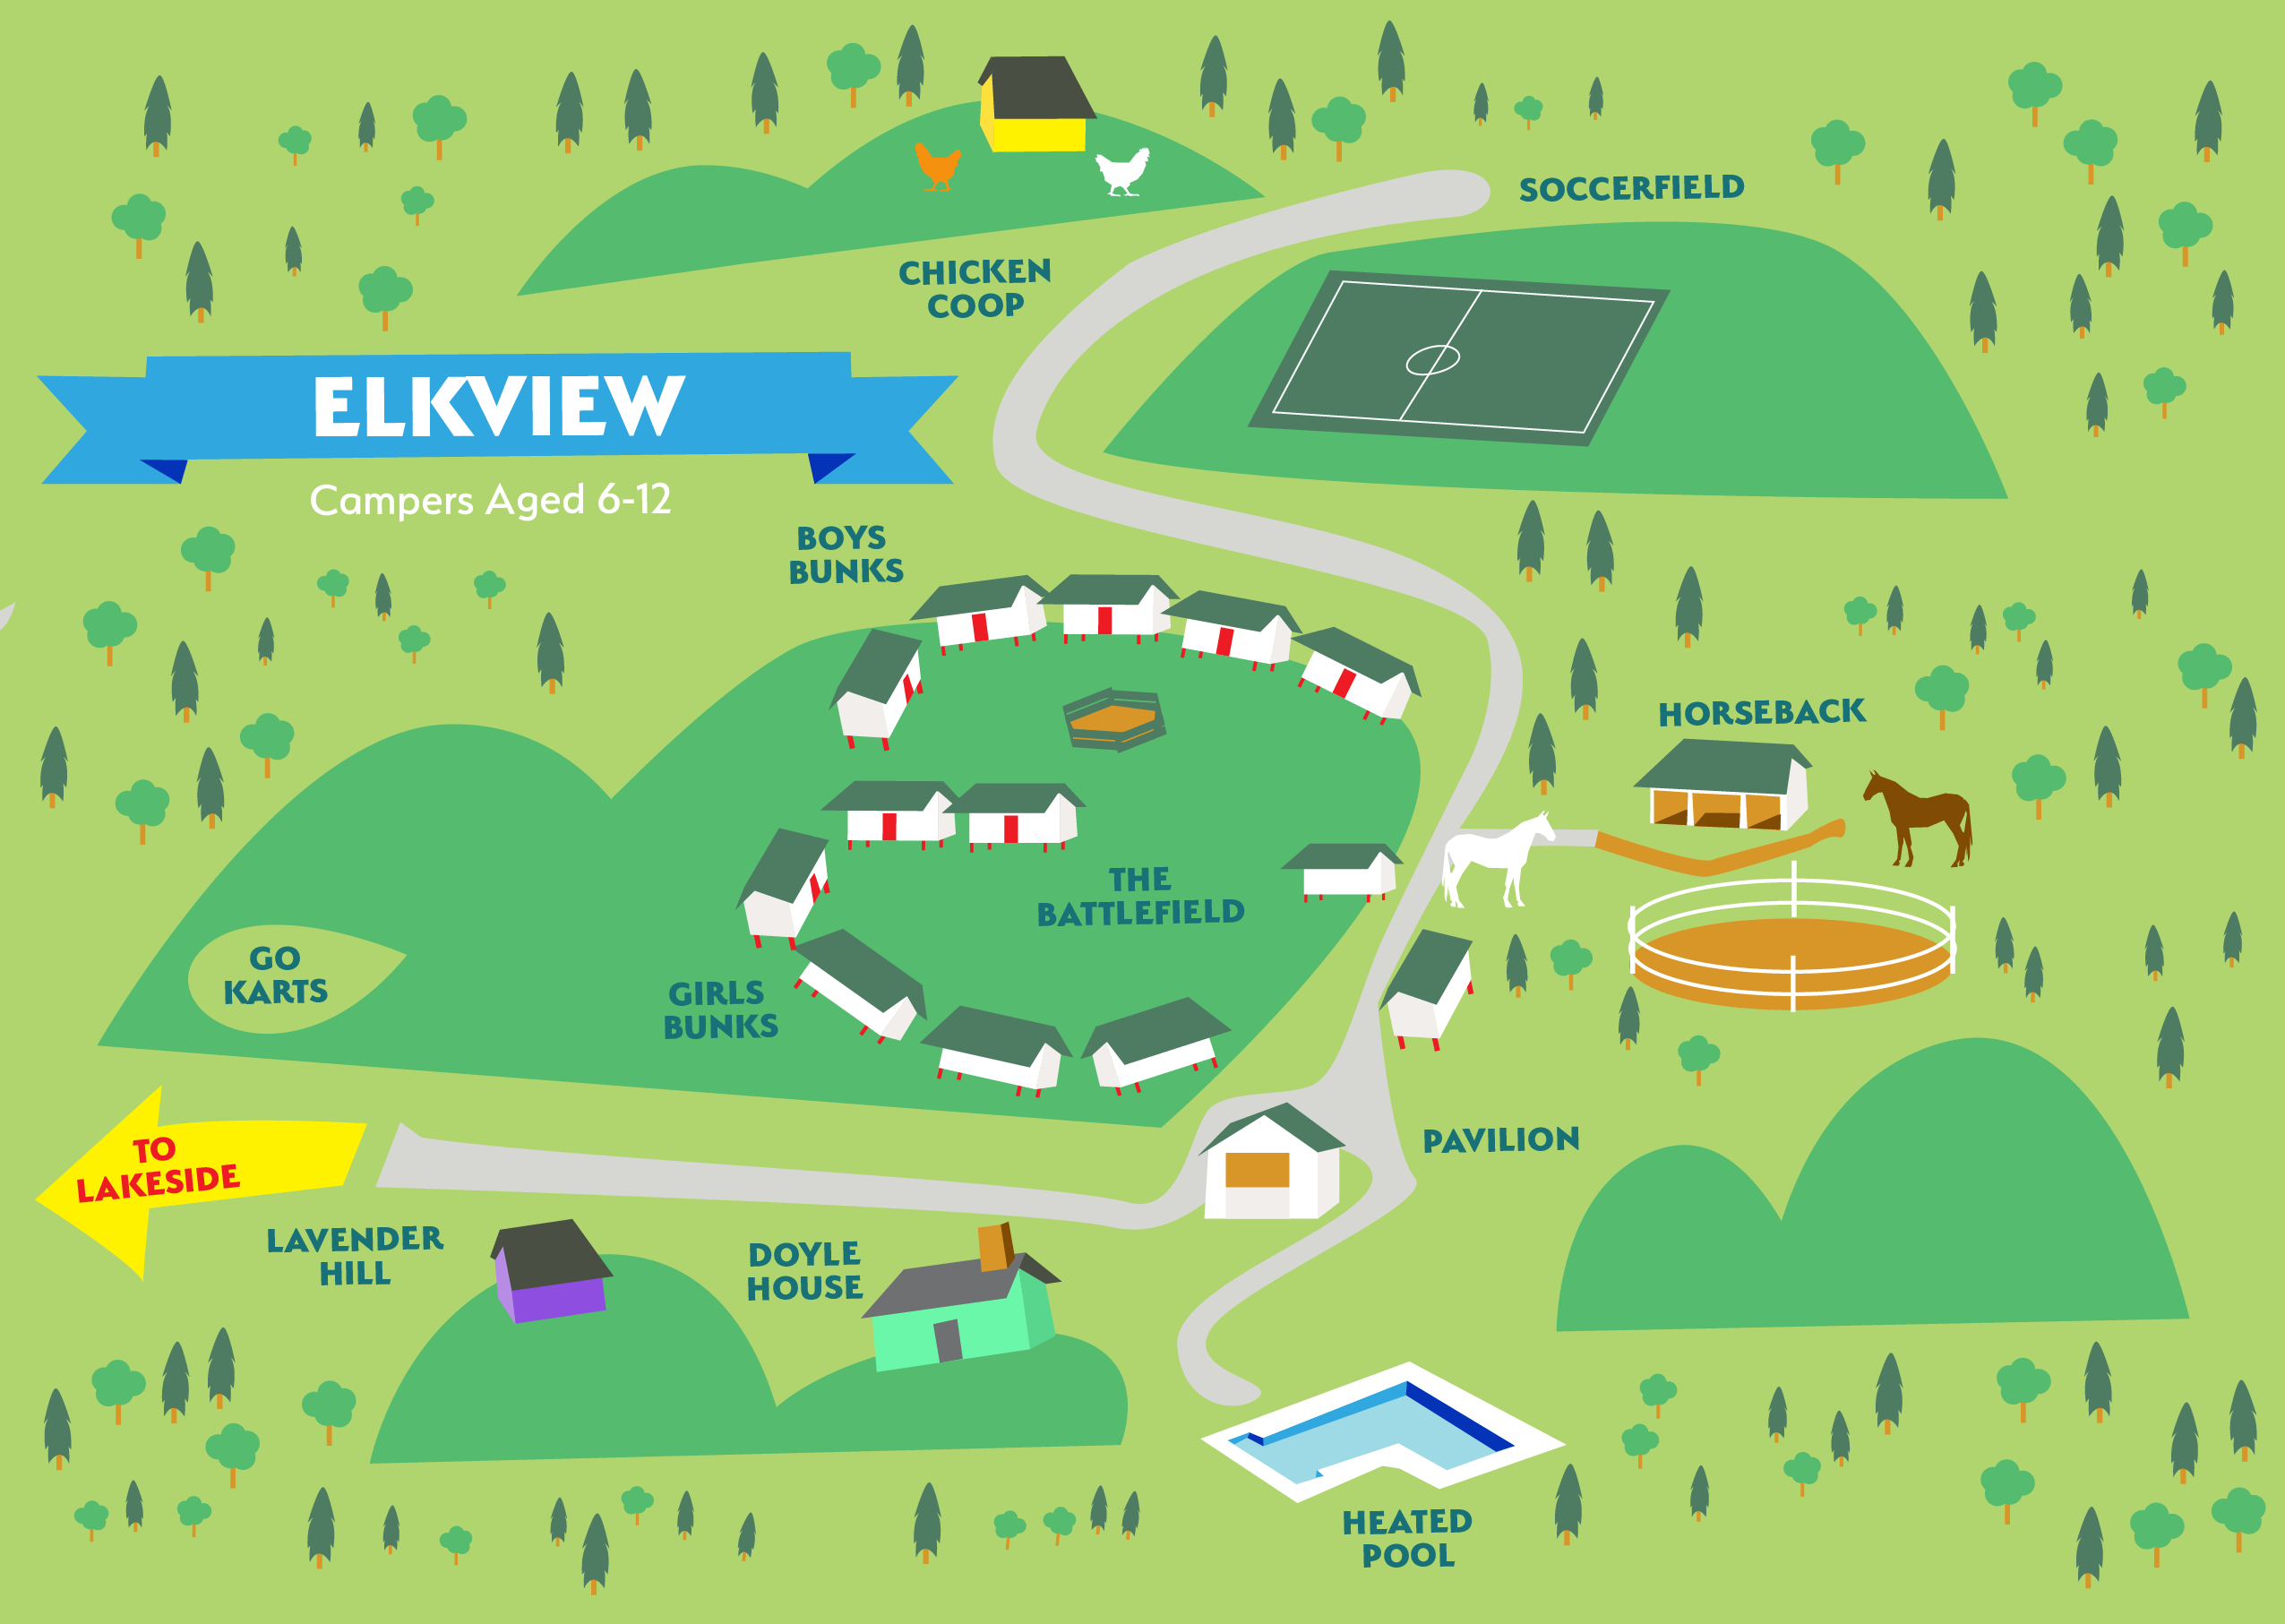 Map of Elkview side of ILC campus